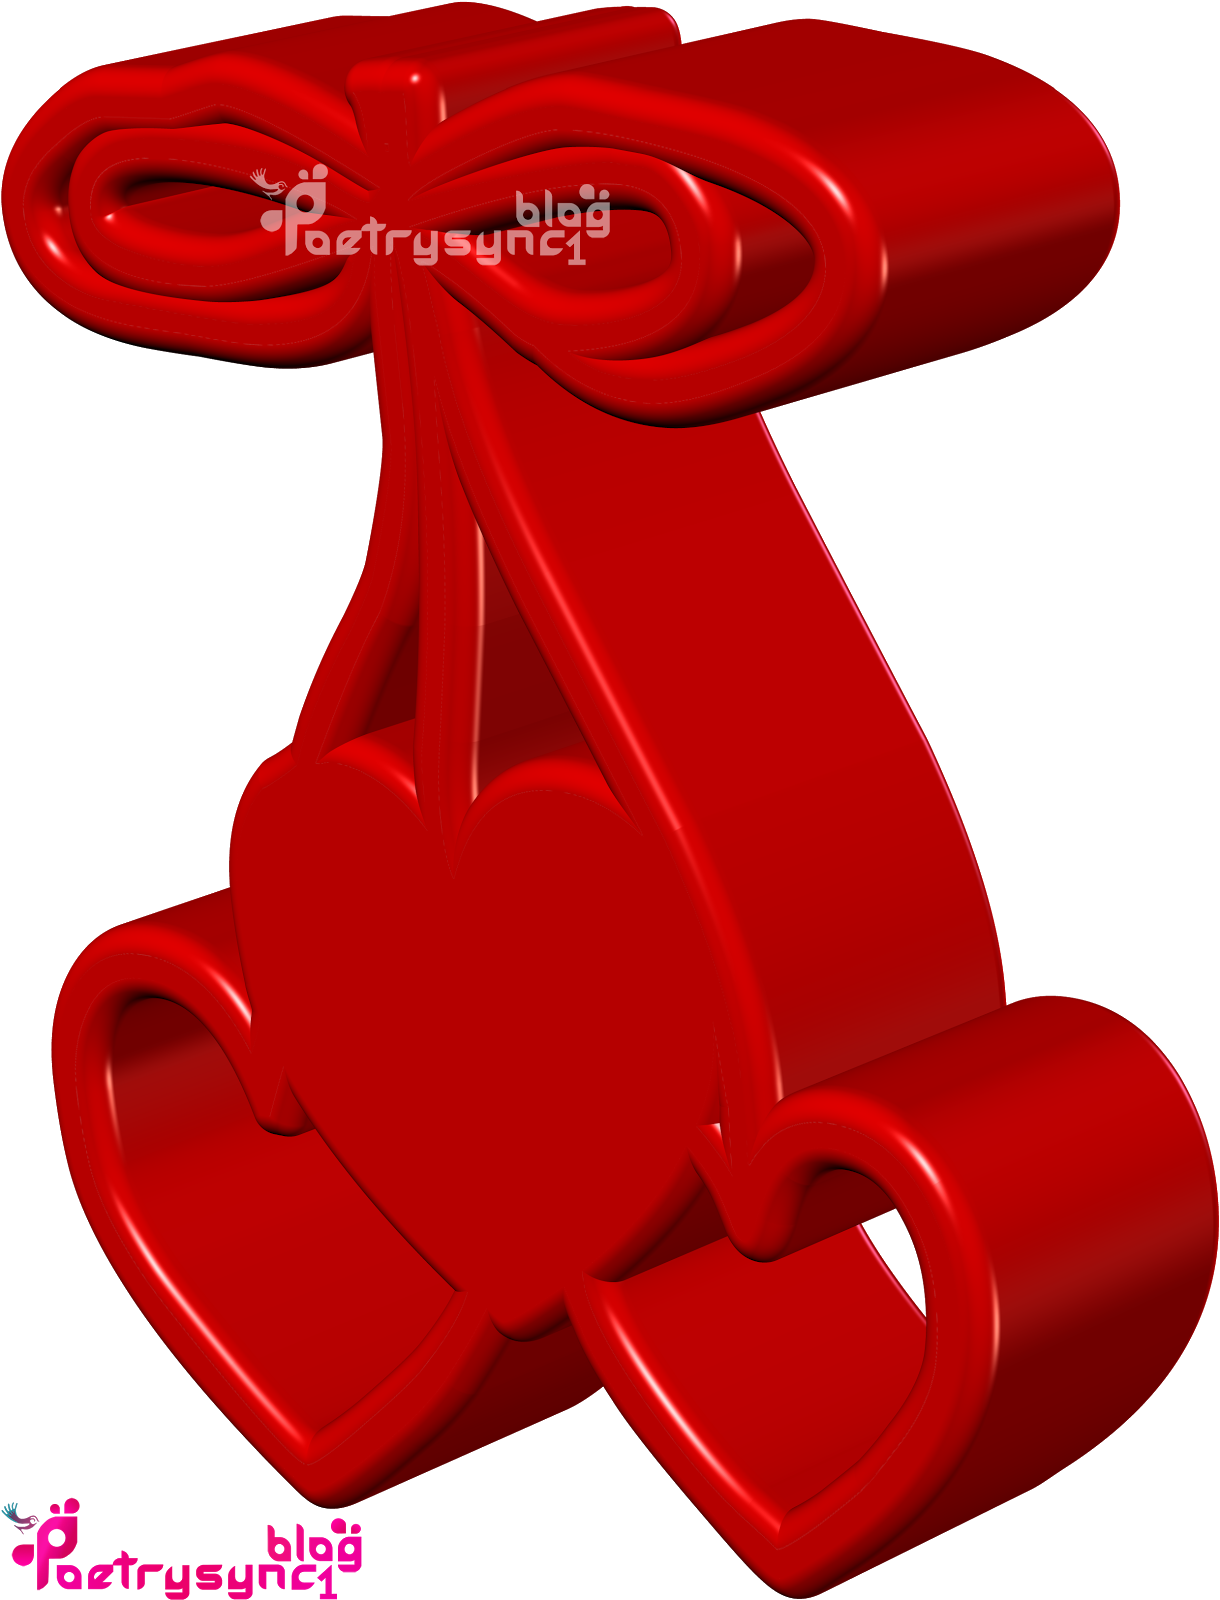 Love-3D-3-Hearts-Image-Wallpaper-In-Red-Colour-By-Poetrysync1.blog